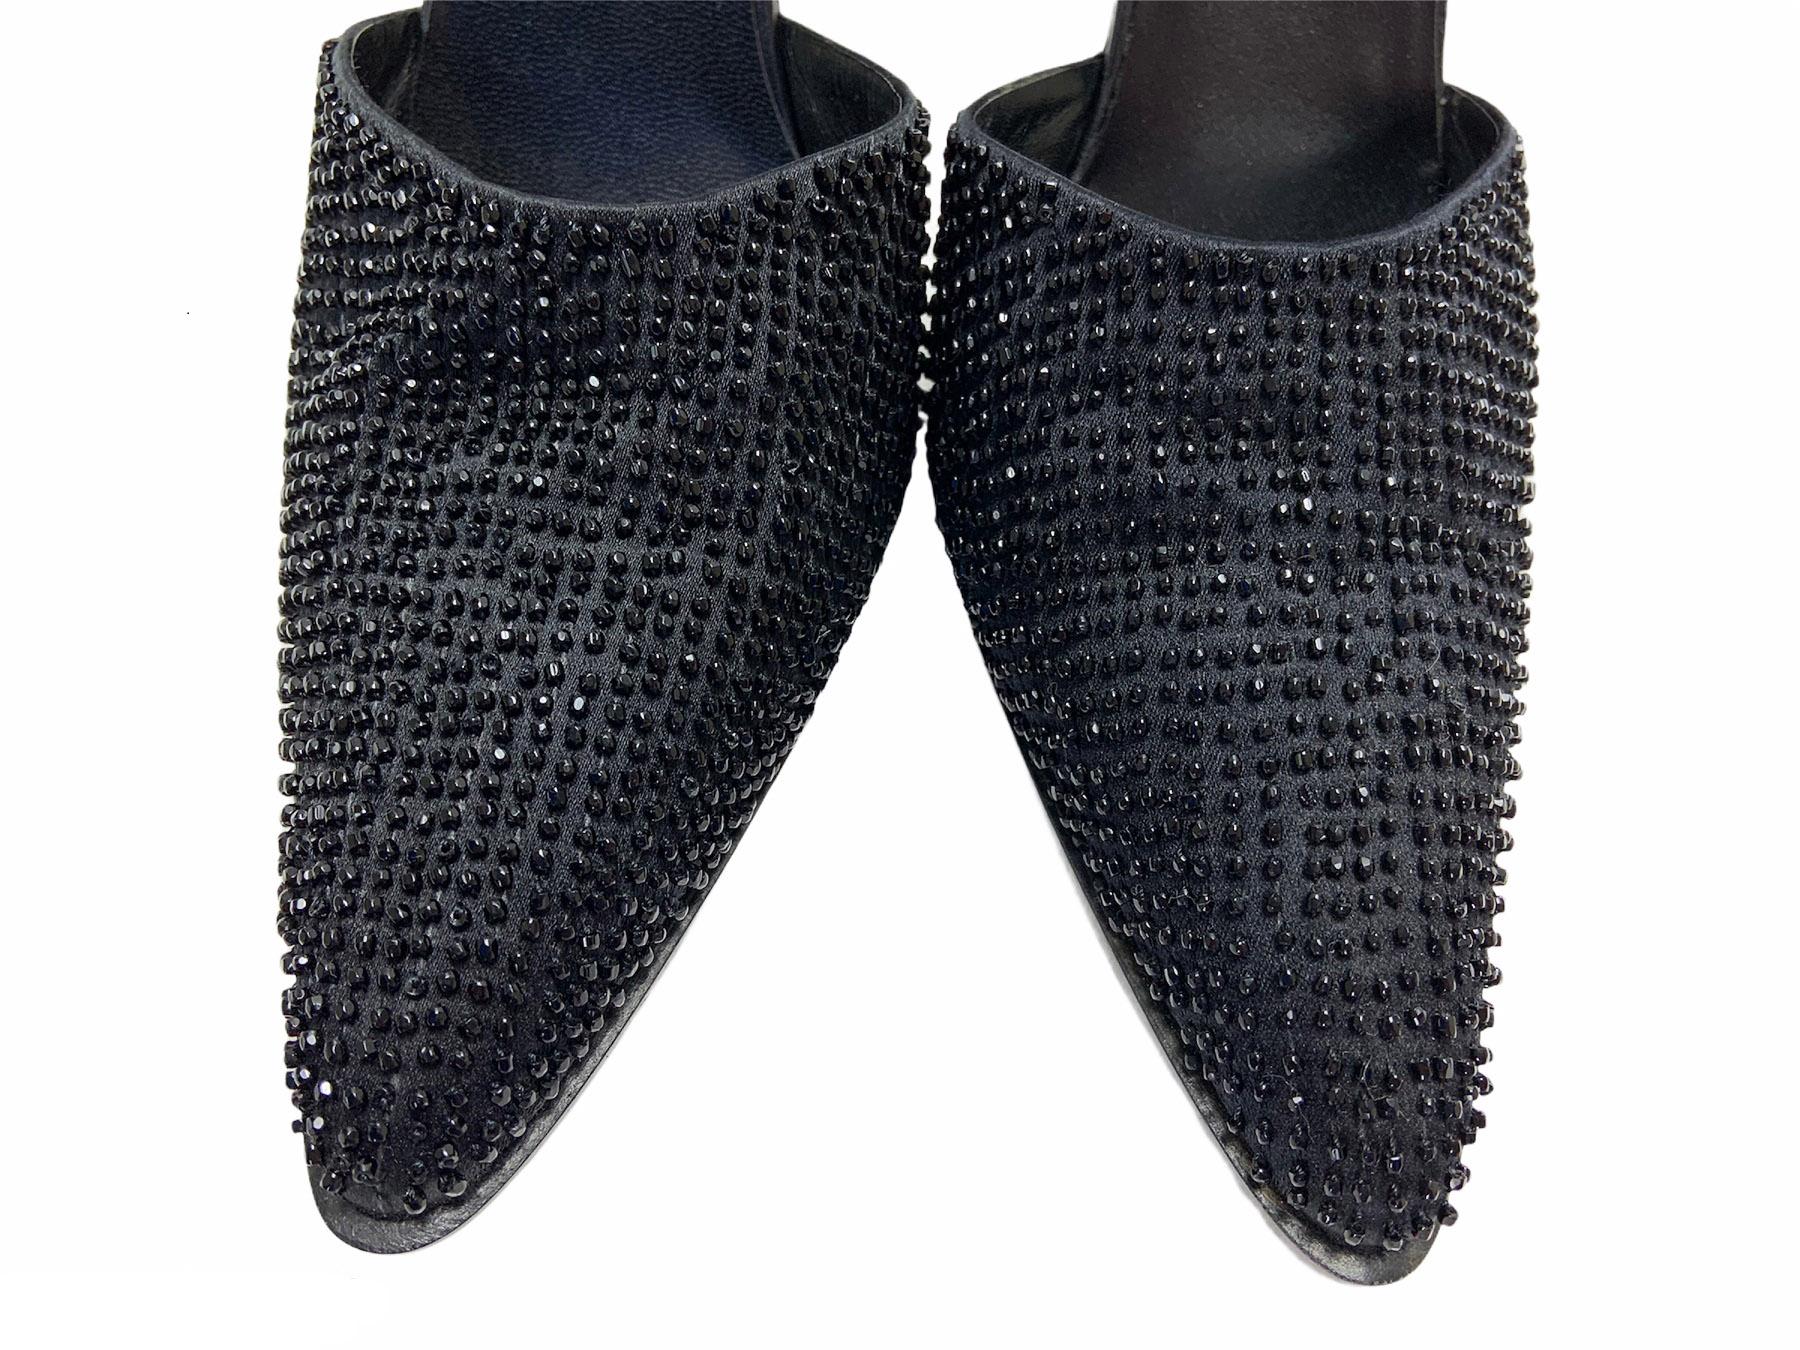 Black New Tom Ford for Gucci 1997 Collection Beaded Ankle-Strap Shoes 38 C - US 8 C For Sale